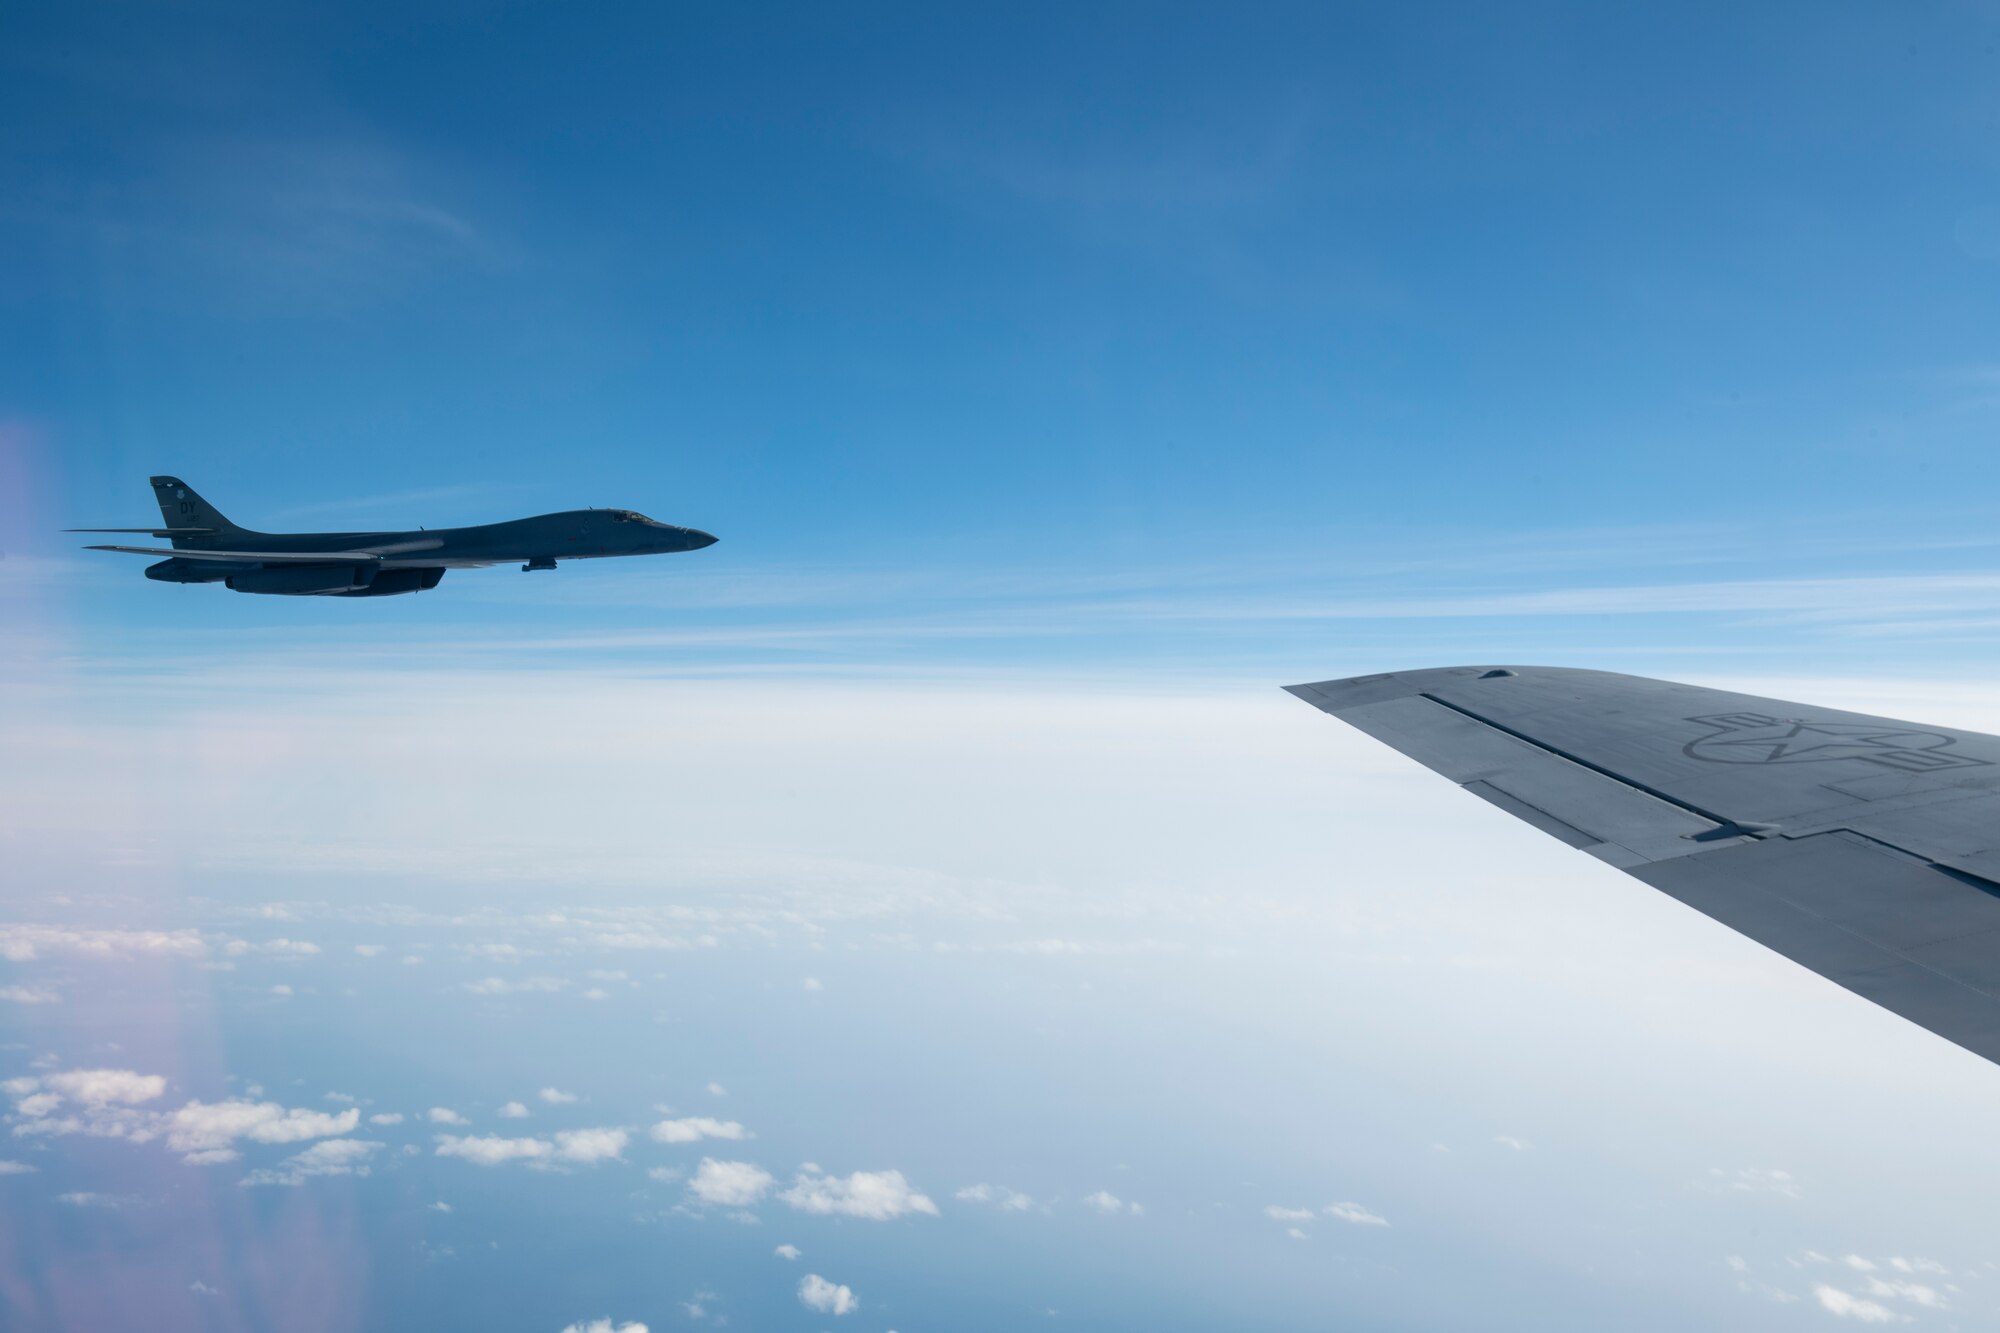 A B-1B Lancer from the 7th Bomb Wing, Dyess Air Force Base, Texas, departs after receiving fuel from a KC-135R Stratotanker over the Pacific Ocean during a Bomber Task Force mission, Jan. 11, 2022. Bomber missions contribute to joint force lethality and deter aggression in the Indo-Pacific. (U.S. Air Force photo by Airman 1st Class Moses Taylor)